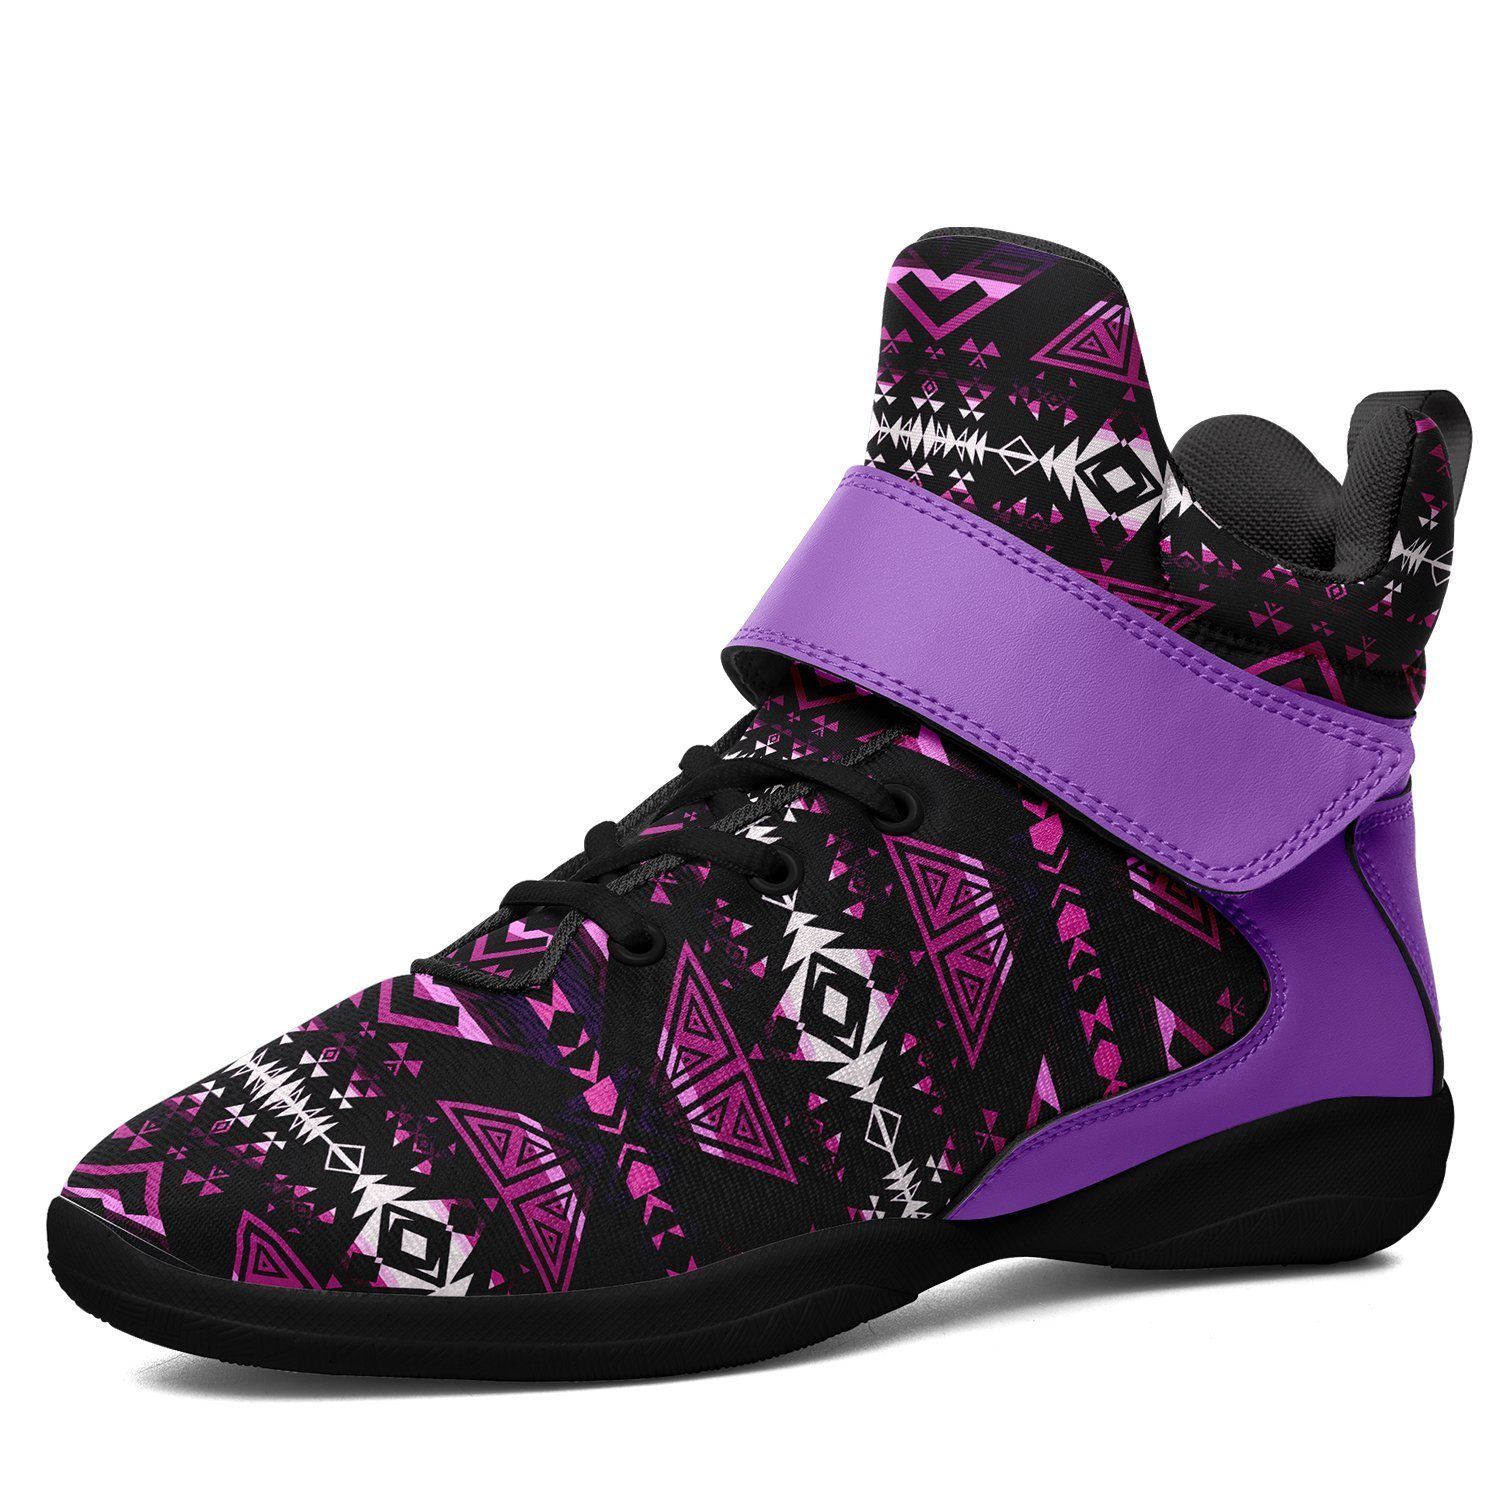 Upstream Expedition Moonlight Shadows Ipottaa Basketball / Sport High Top Shoes - Black Sole 49 Dzine US Men 7 / EUR 40 Black Sole with Lavender Strap 